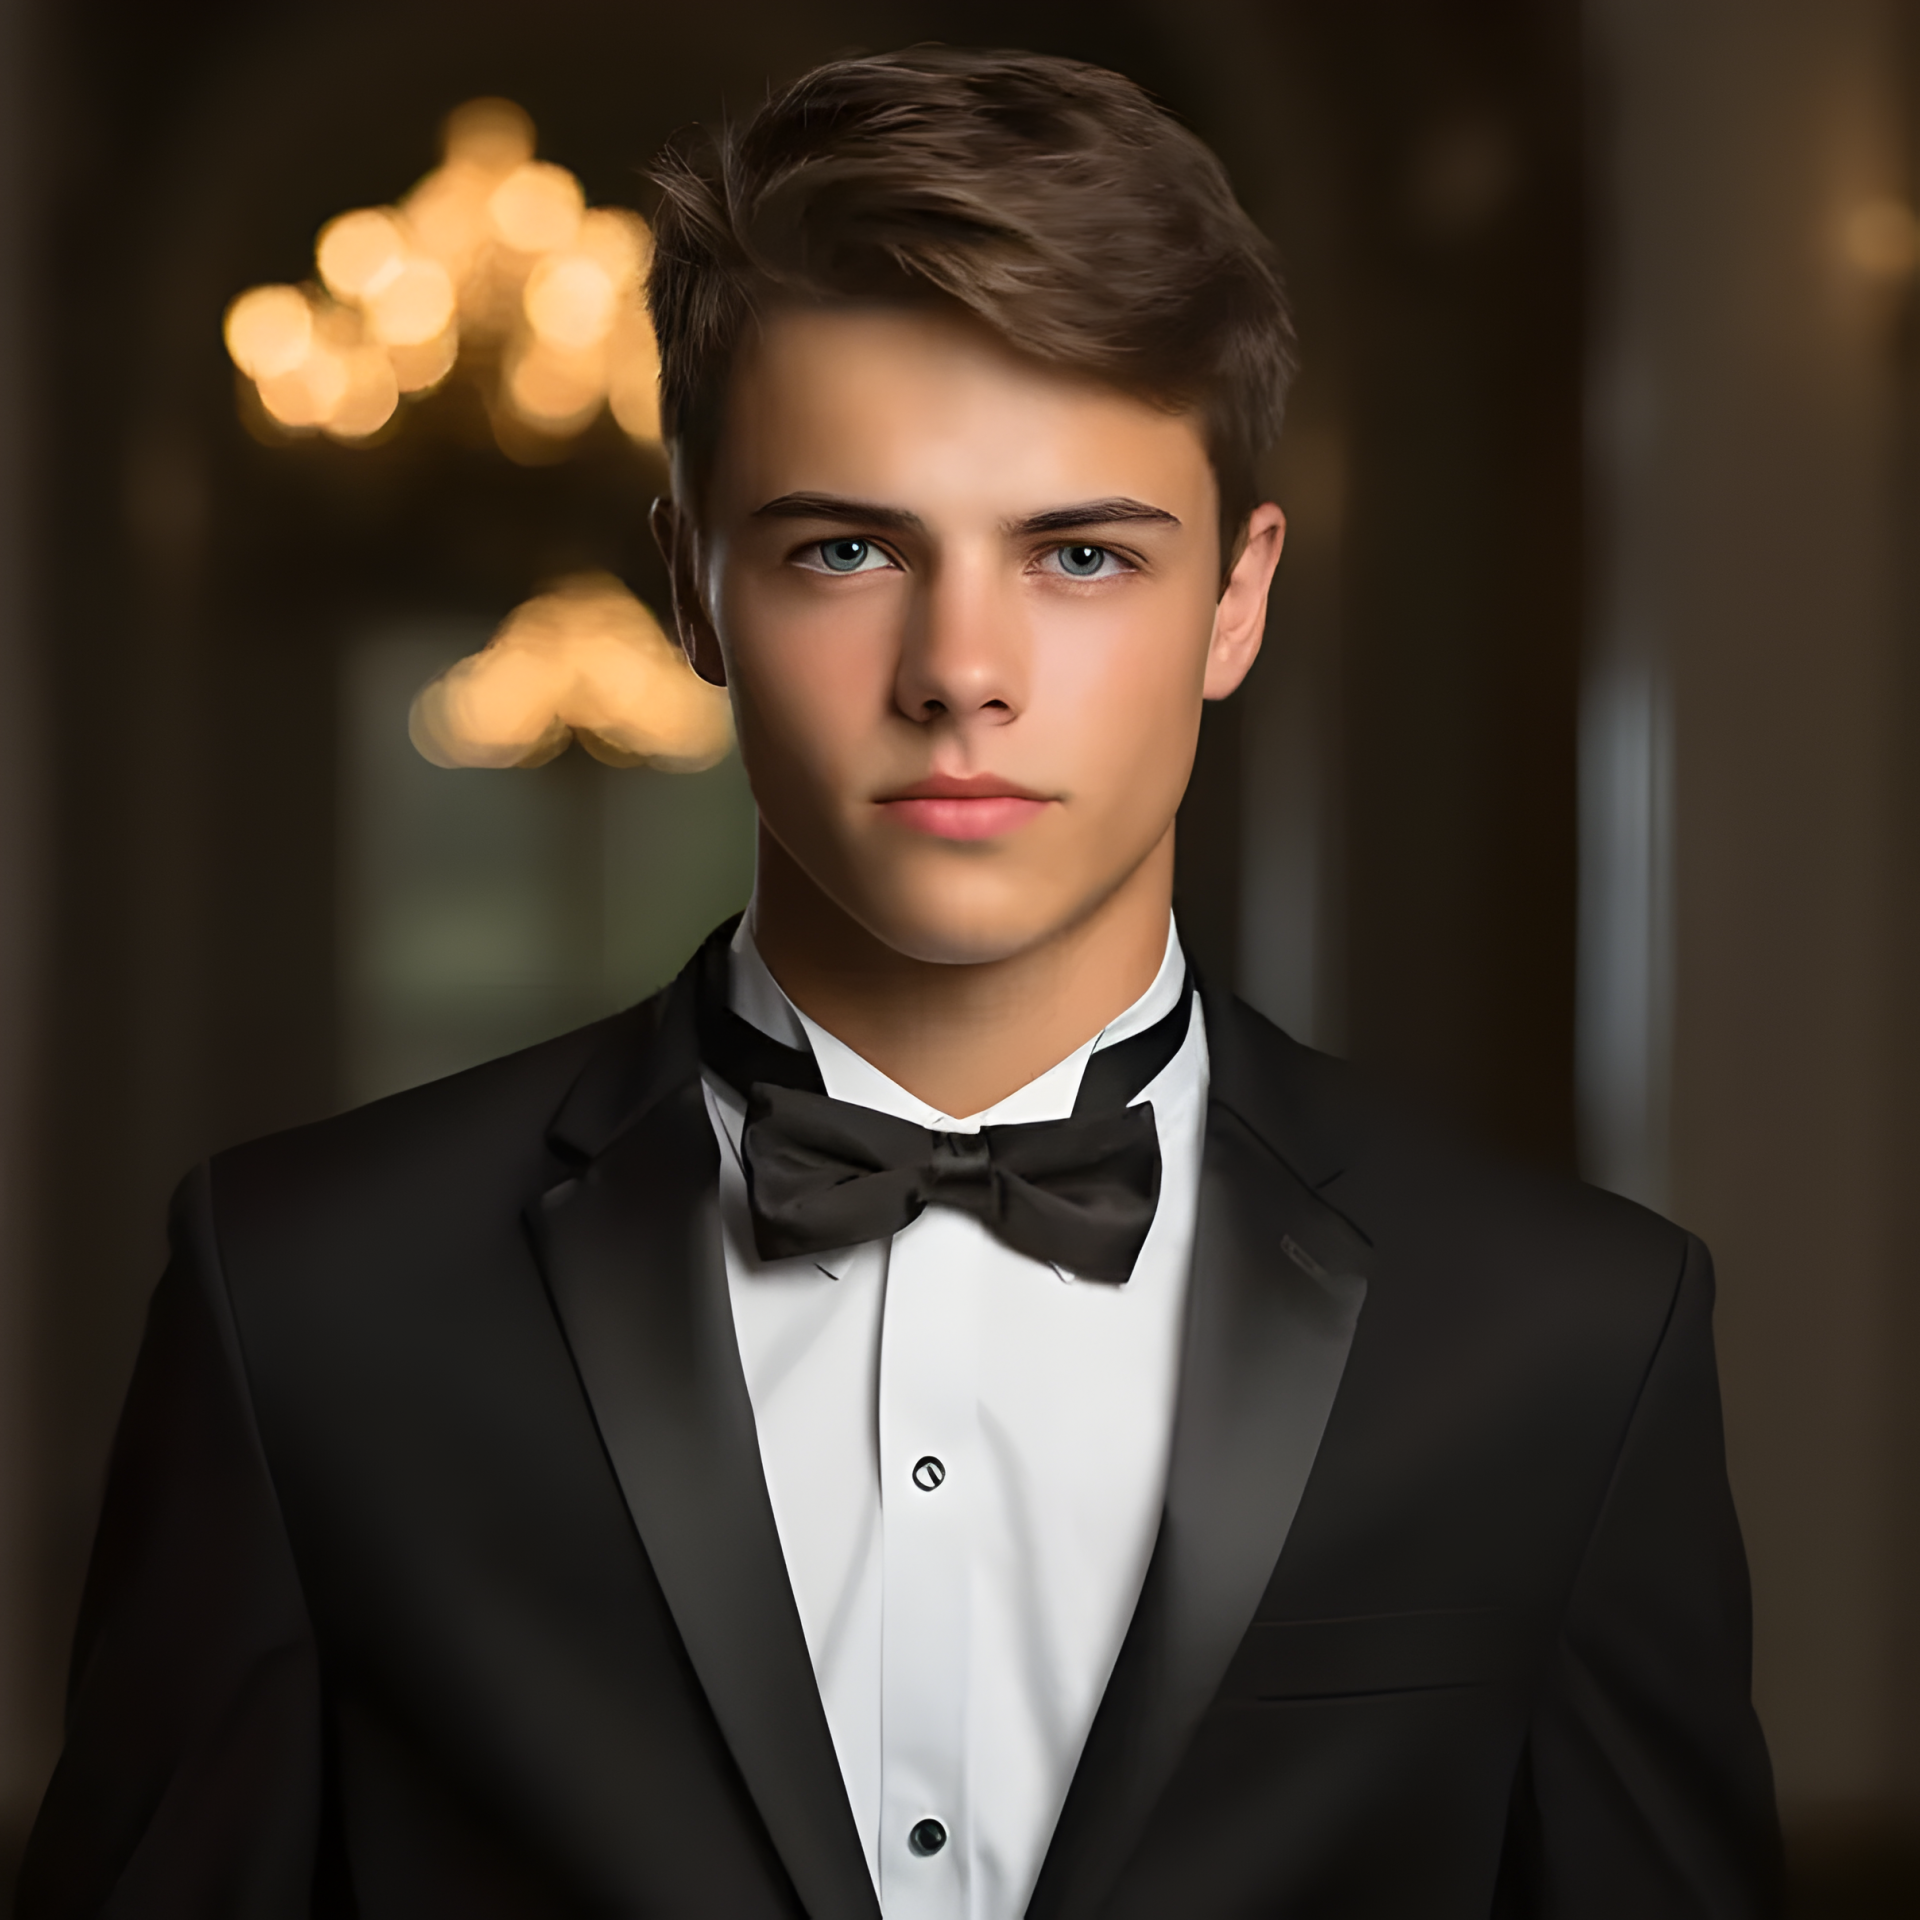 A young man wearing a tuxedo for his prom night